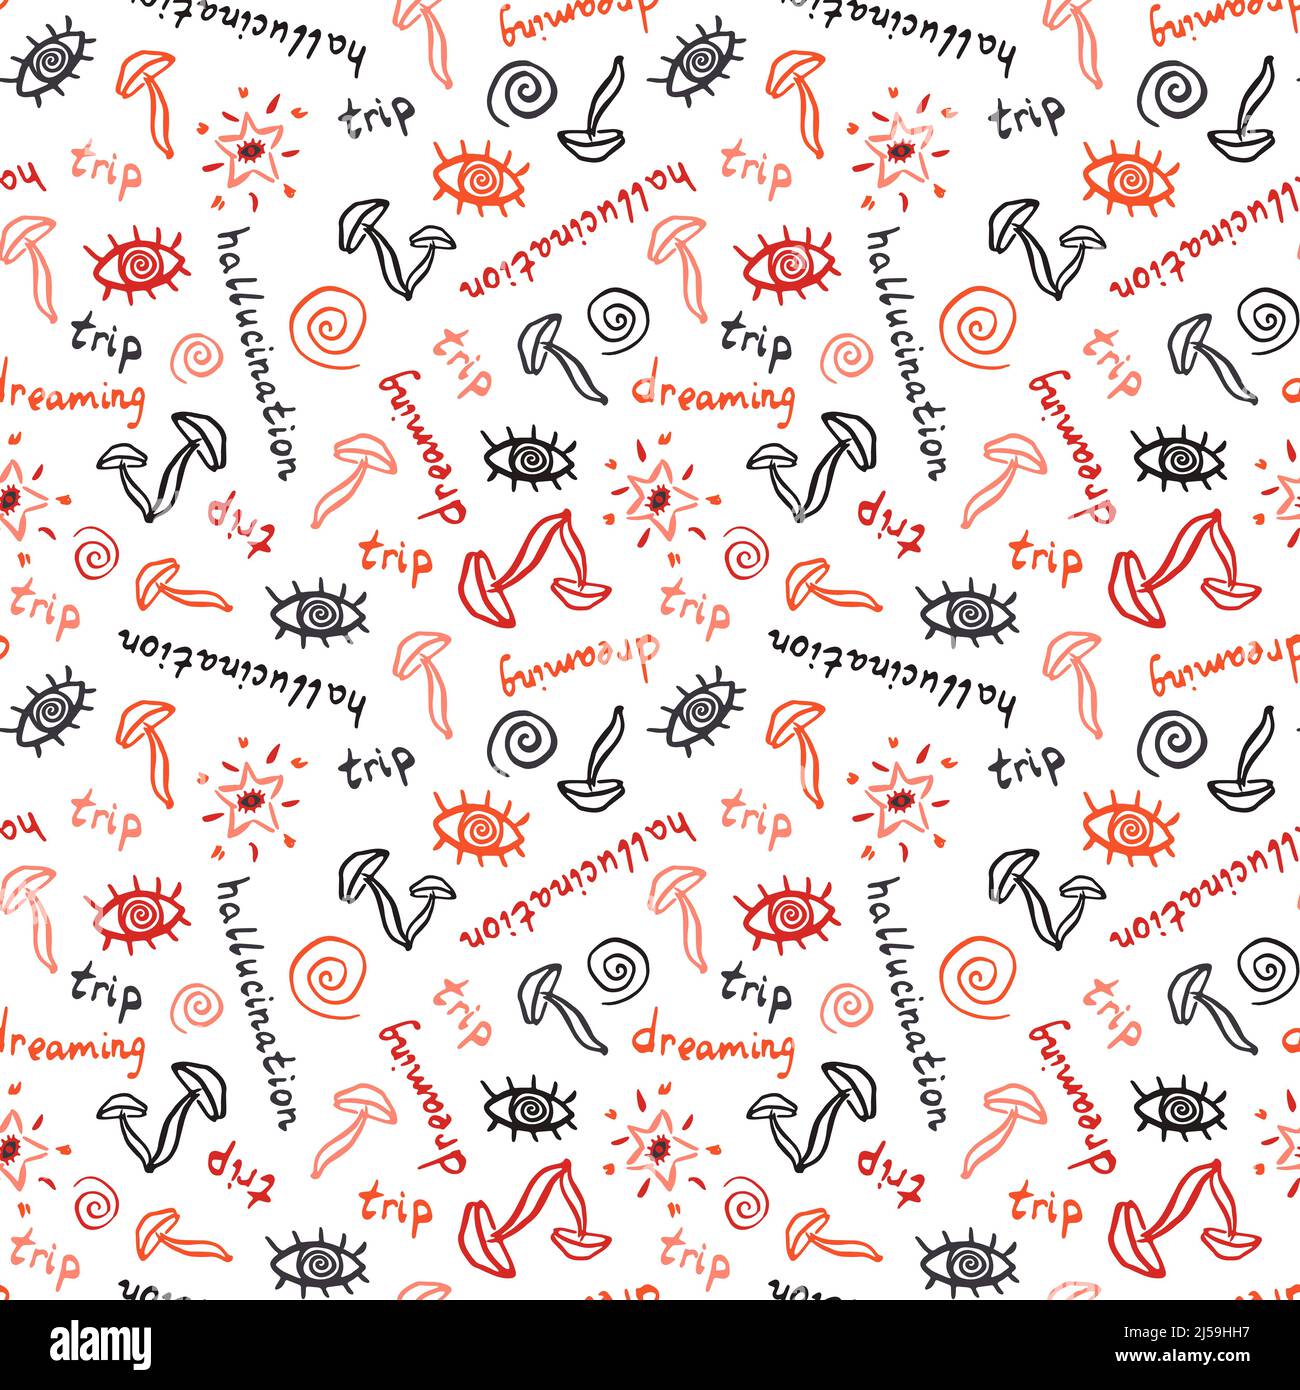 Psycho mushrooms seamless pattern with lettering Stock Vector